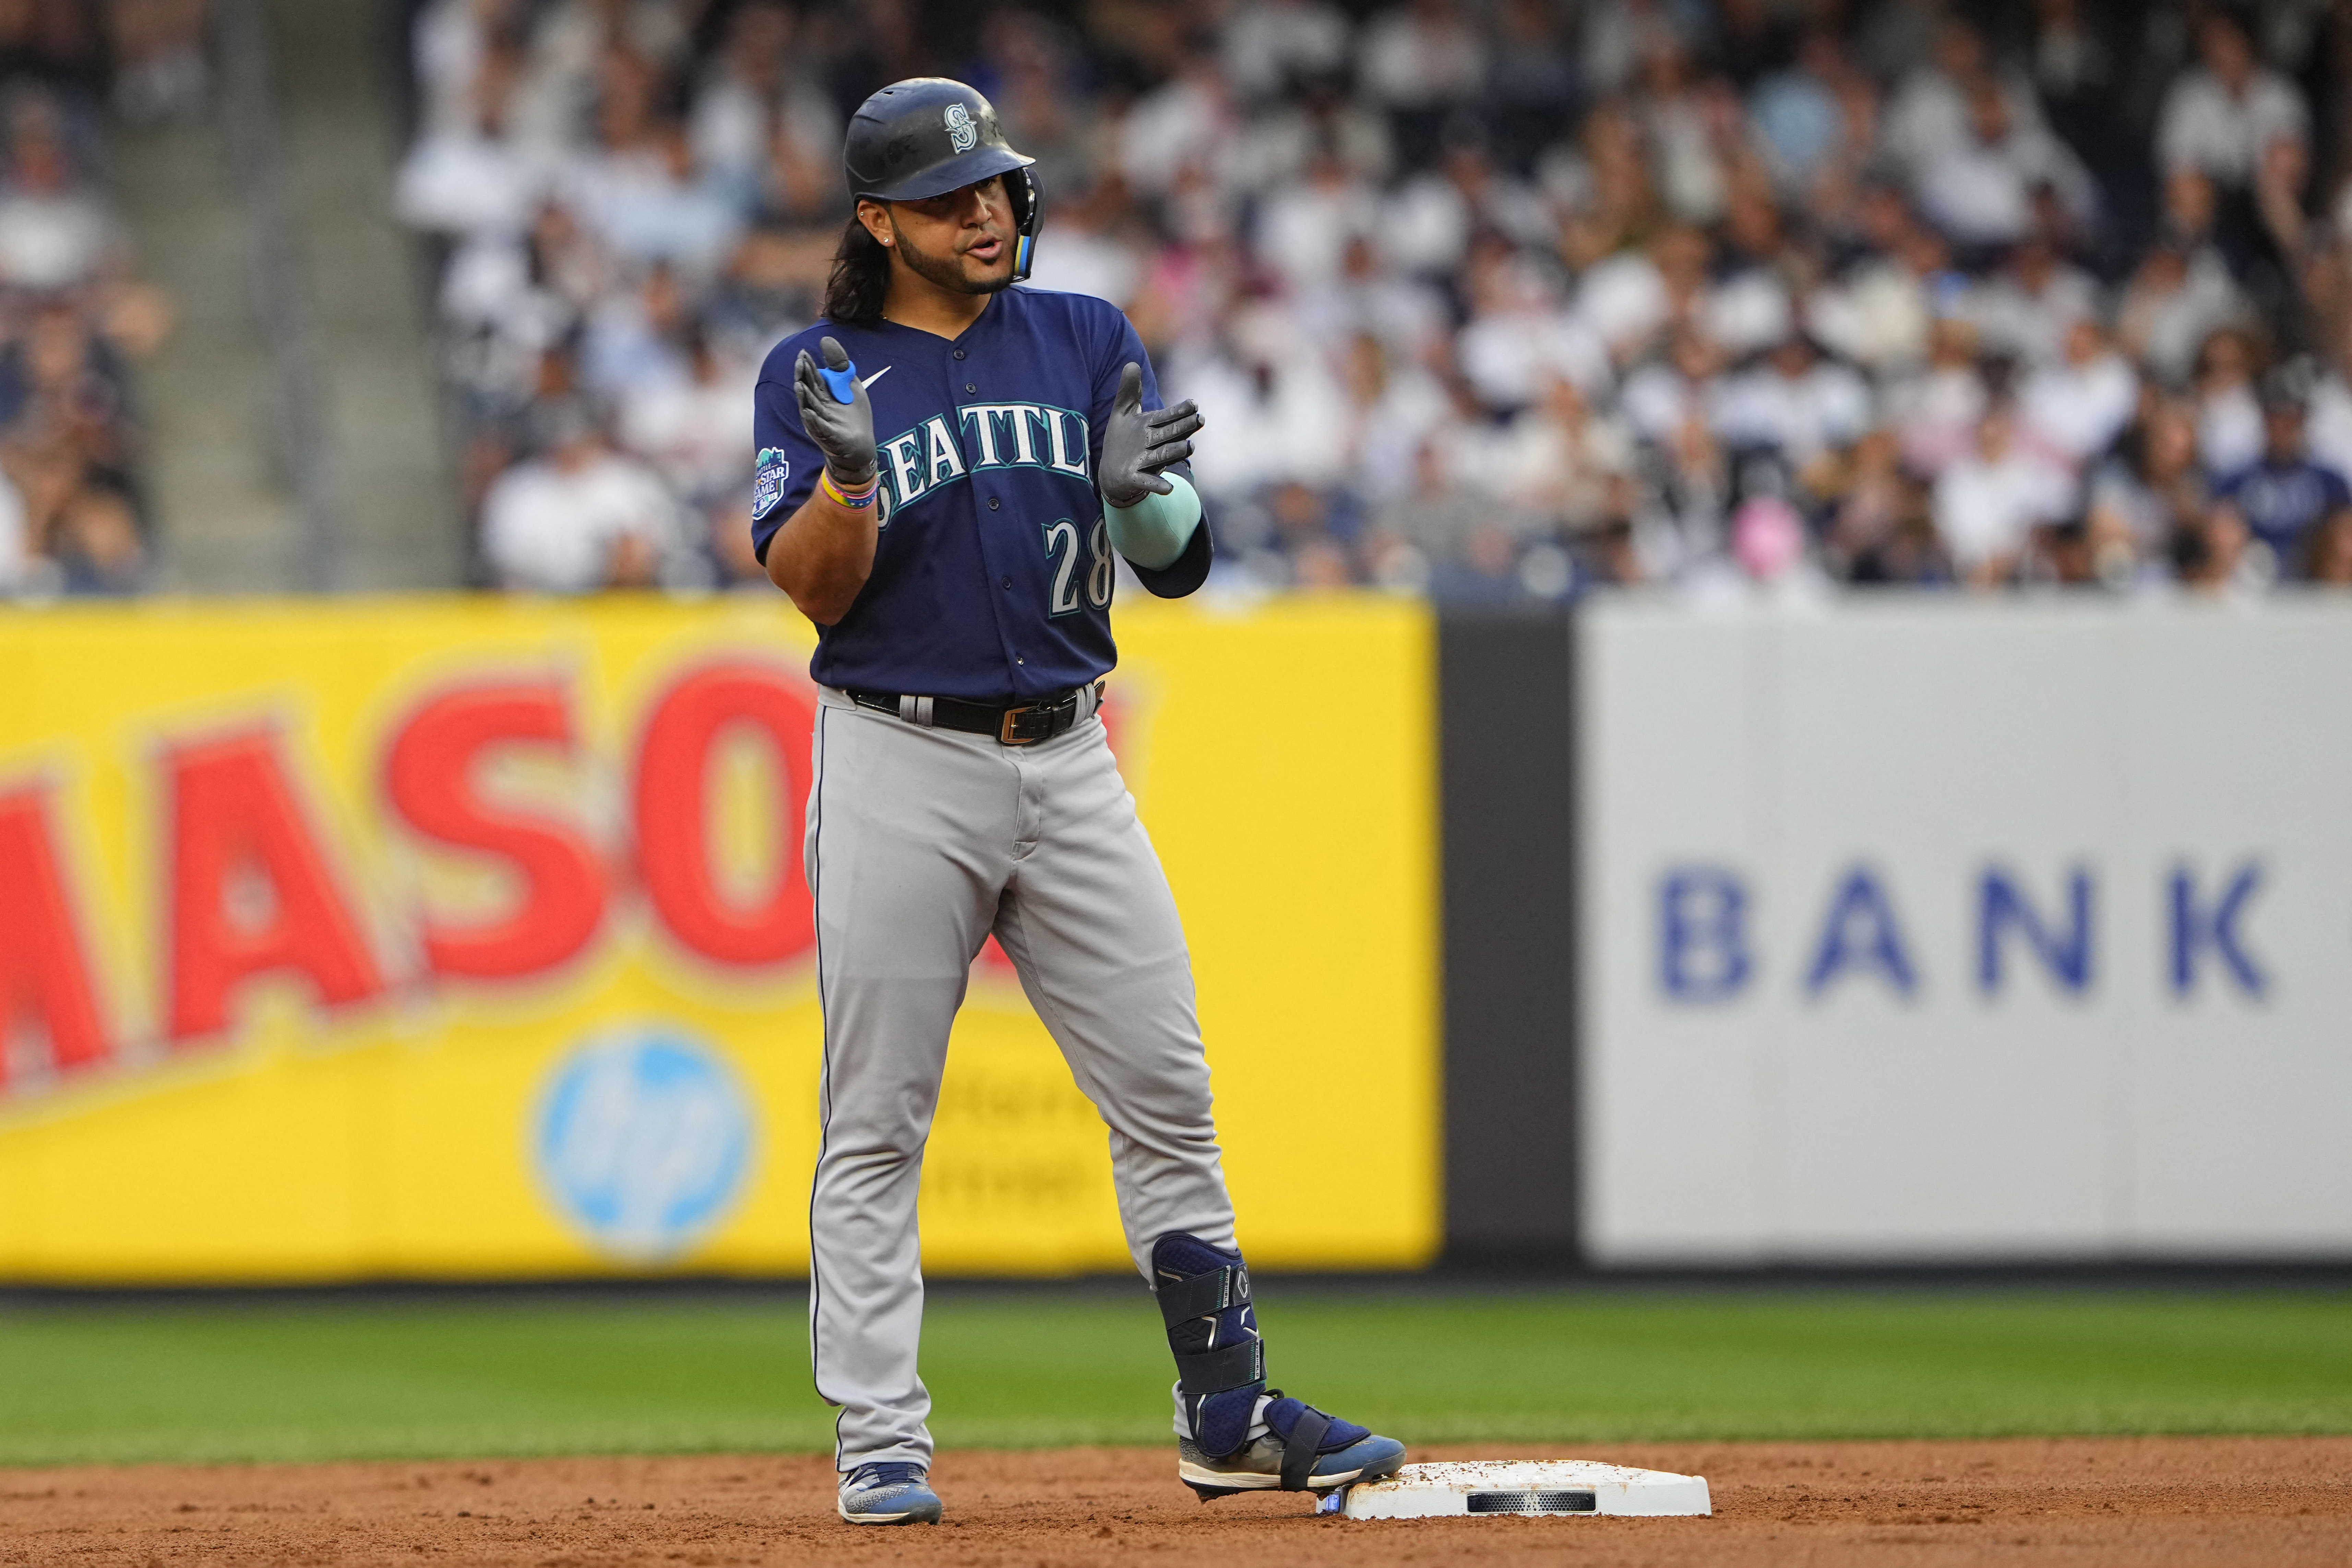 Yankees get back on track against Mariners, Sports